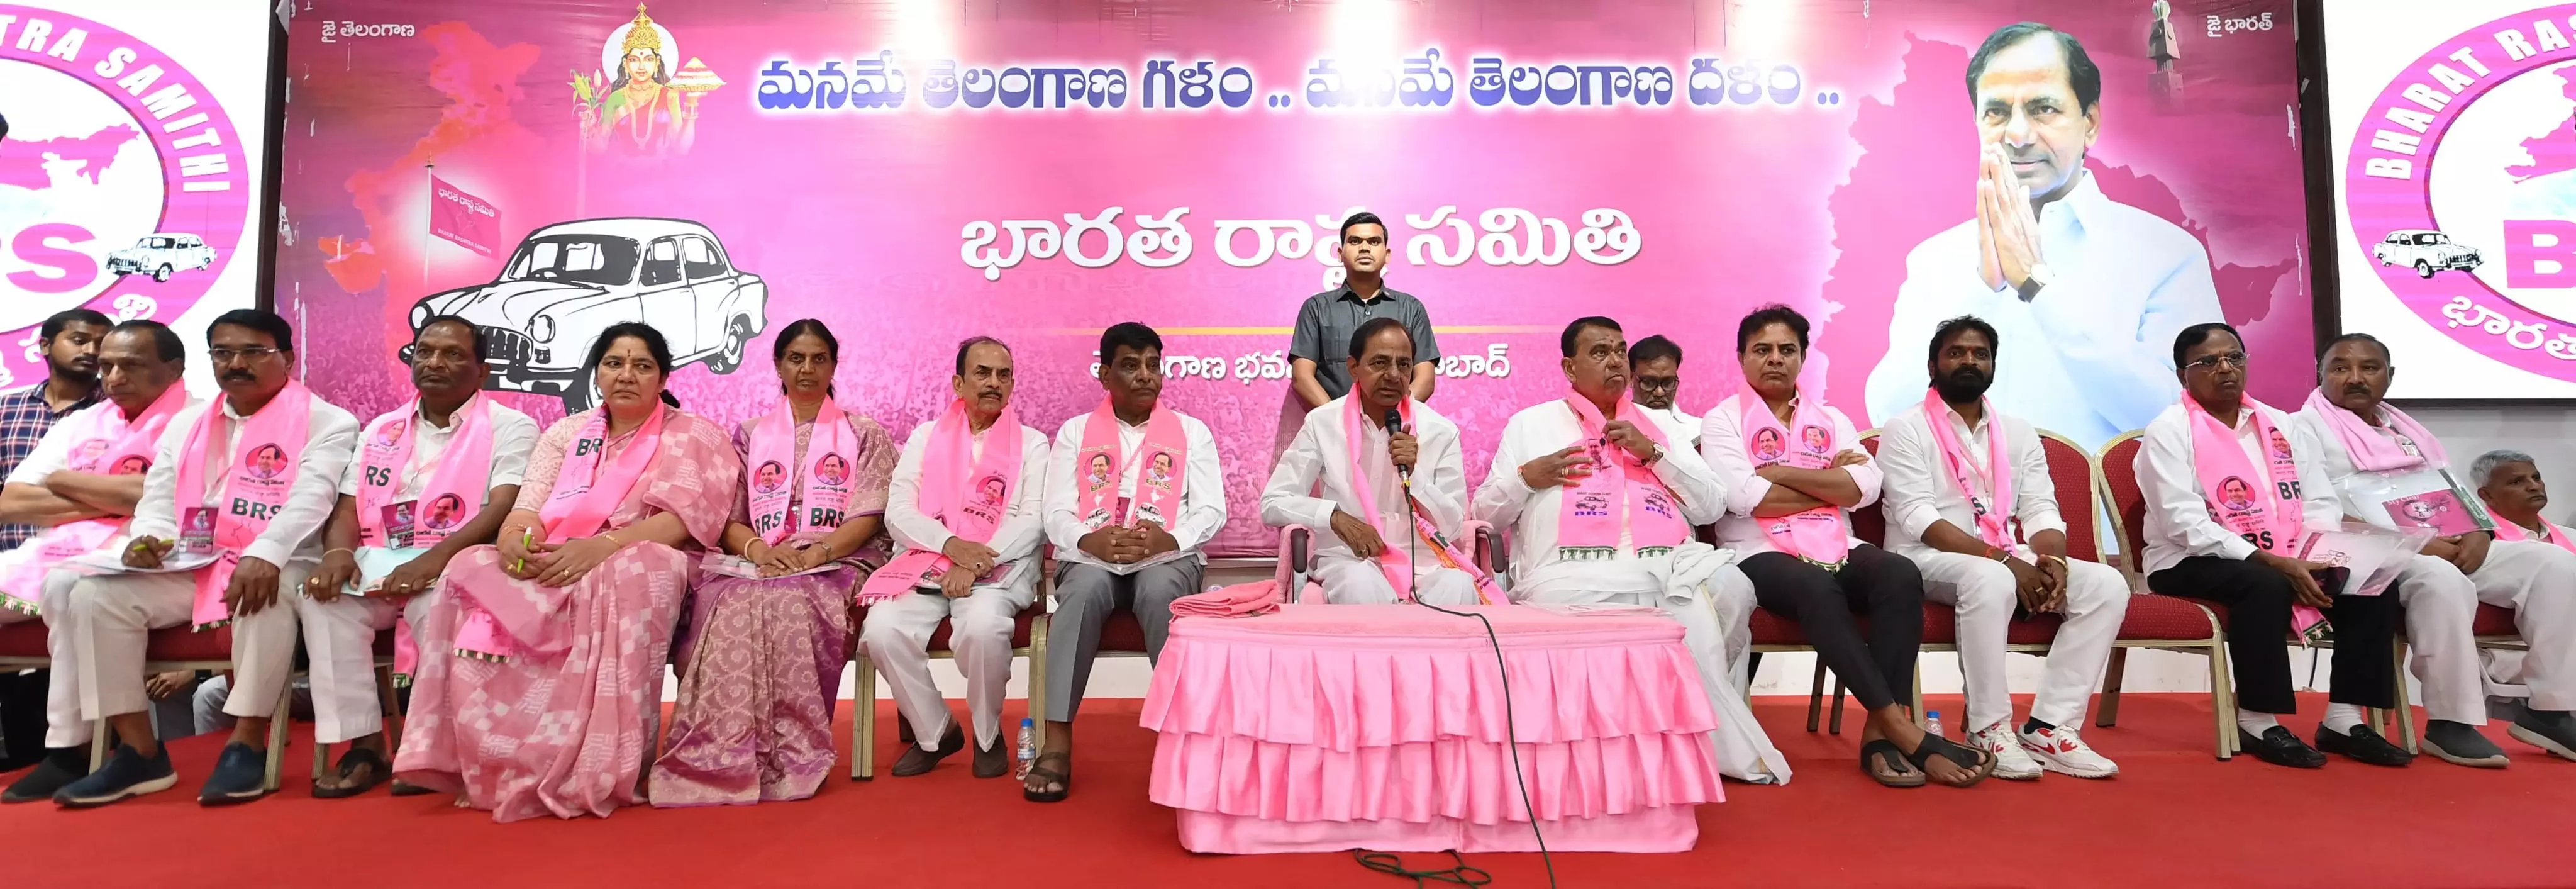 20 Congress MLAs knocking on BRS doors, Revanth may go to BJP: KCR